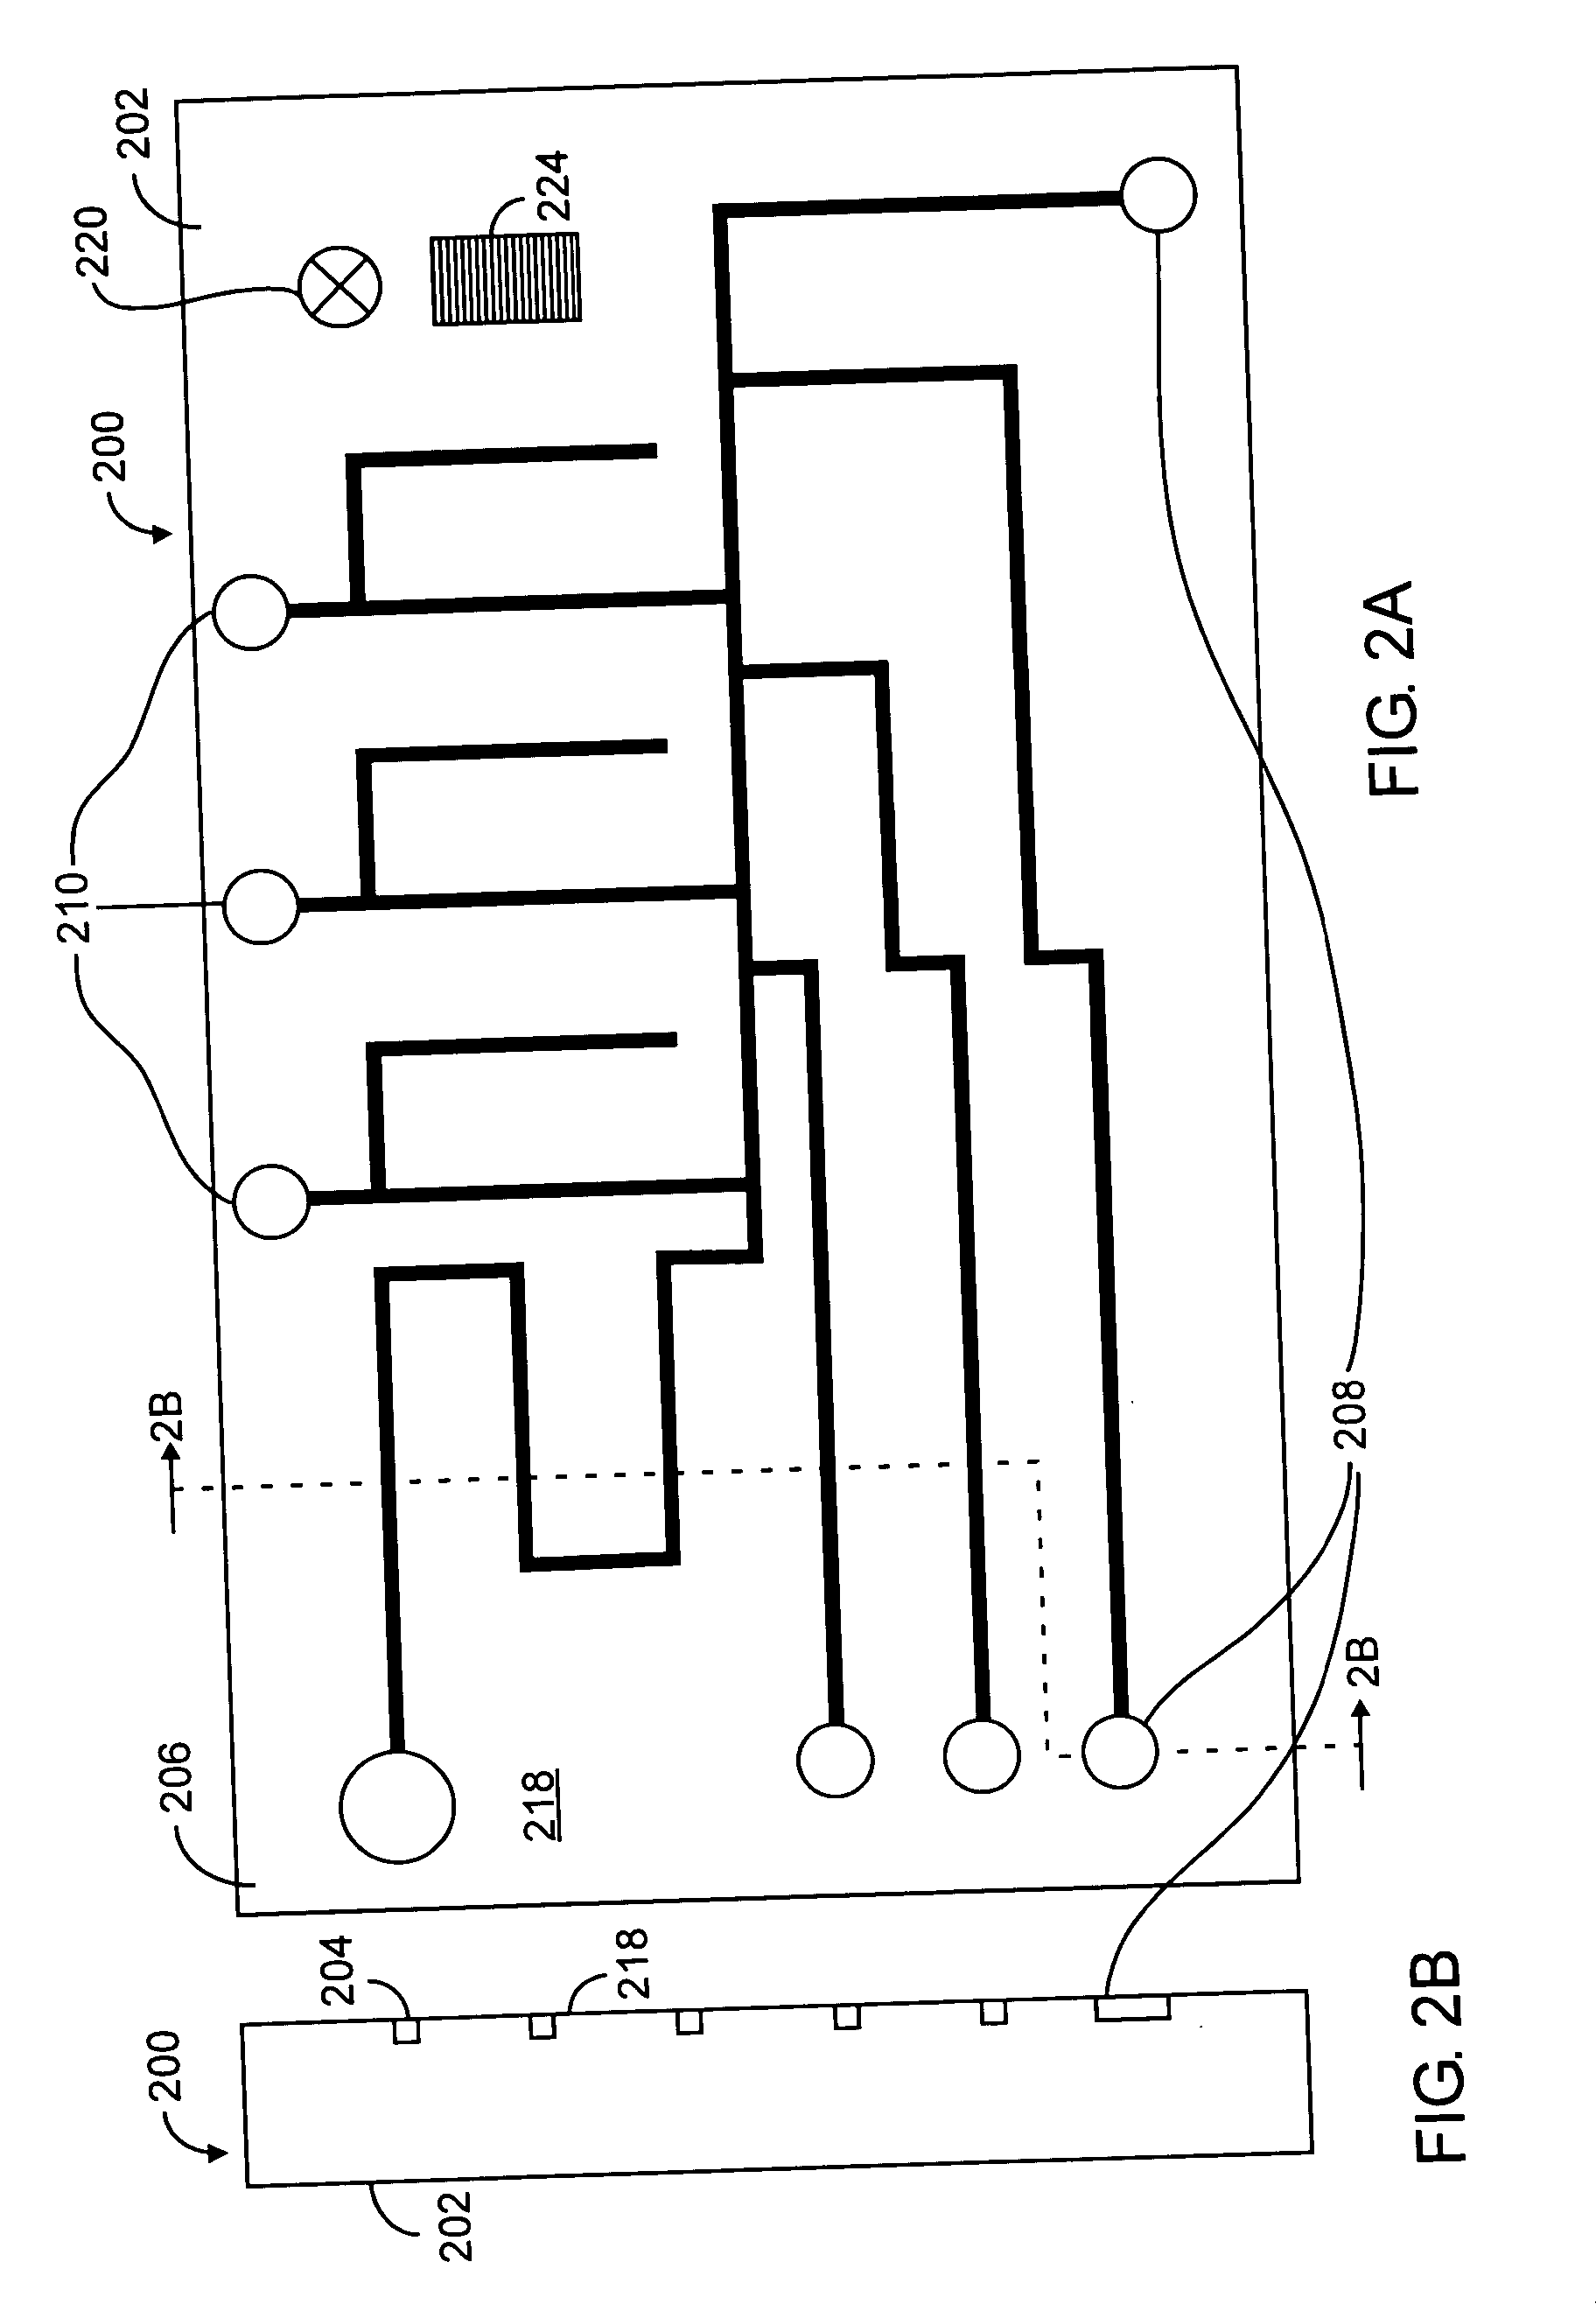 Microfluidic devices with separable actuation and fluid-bearing modules